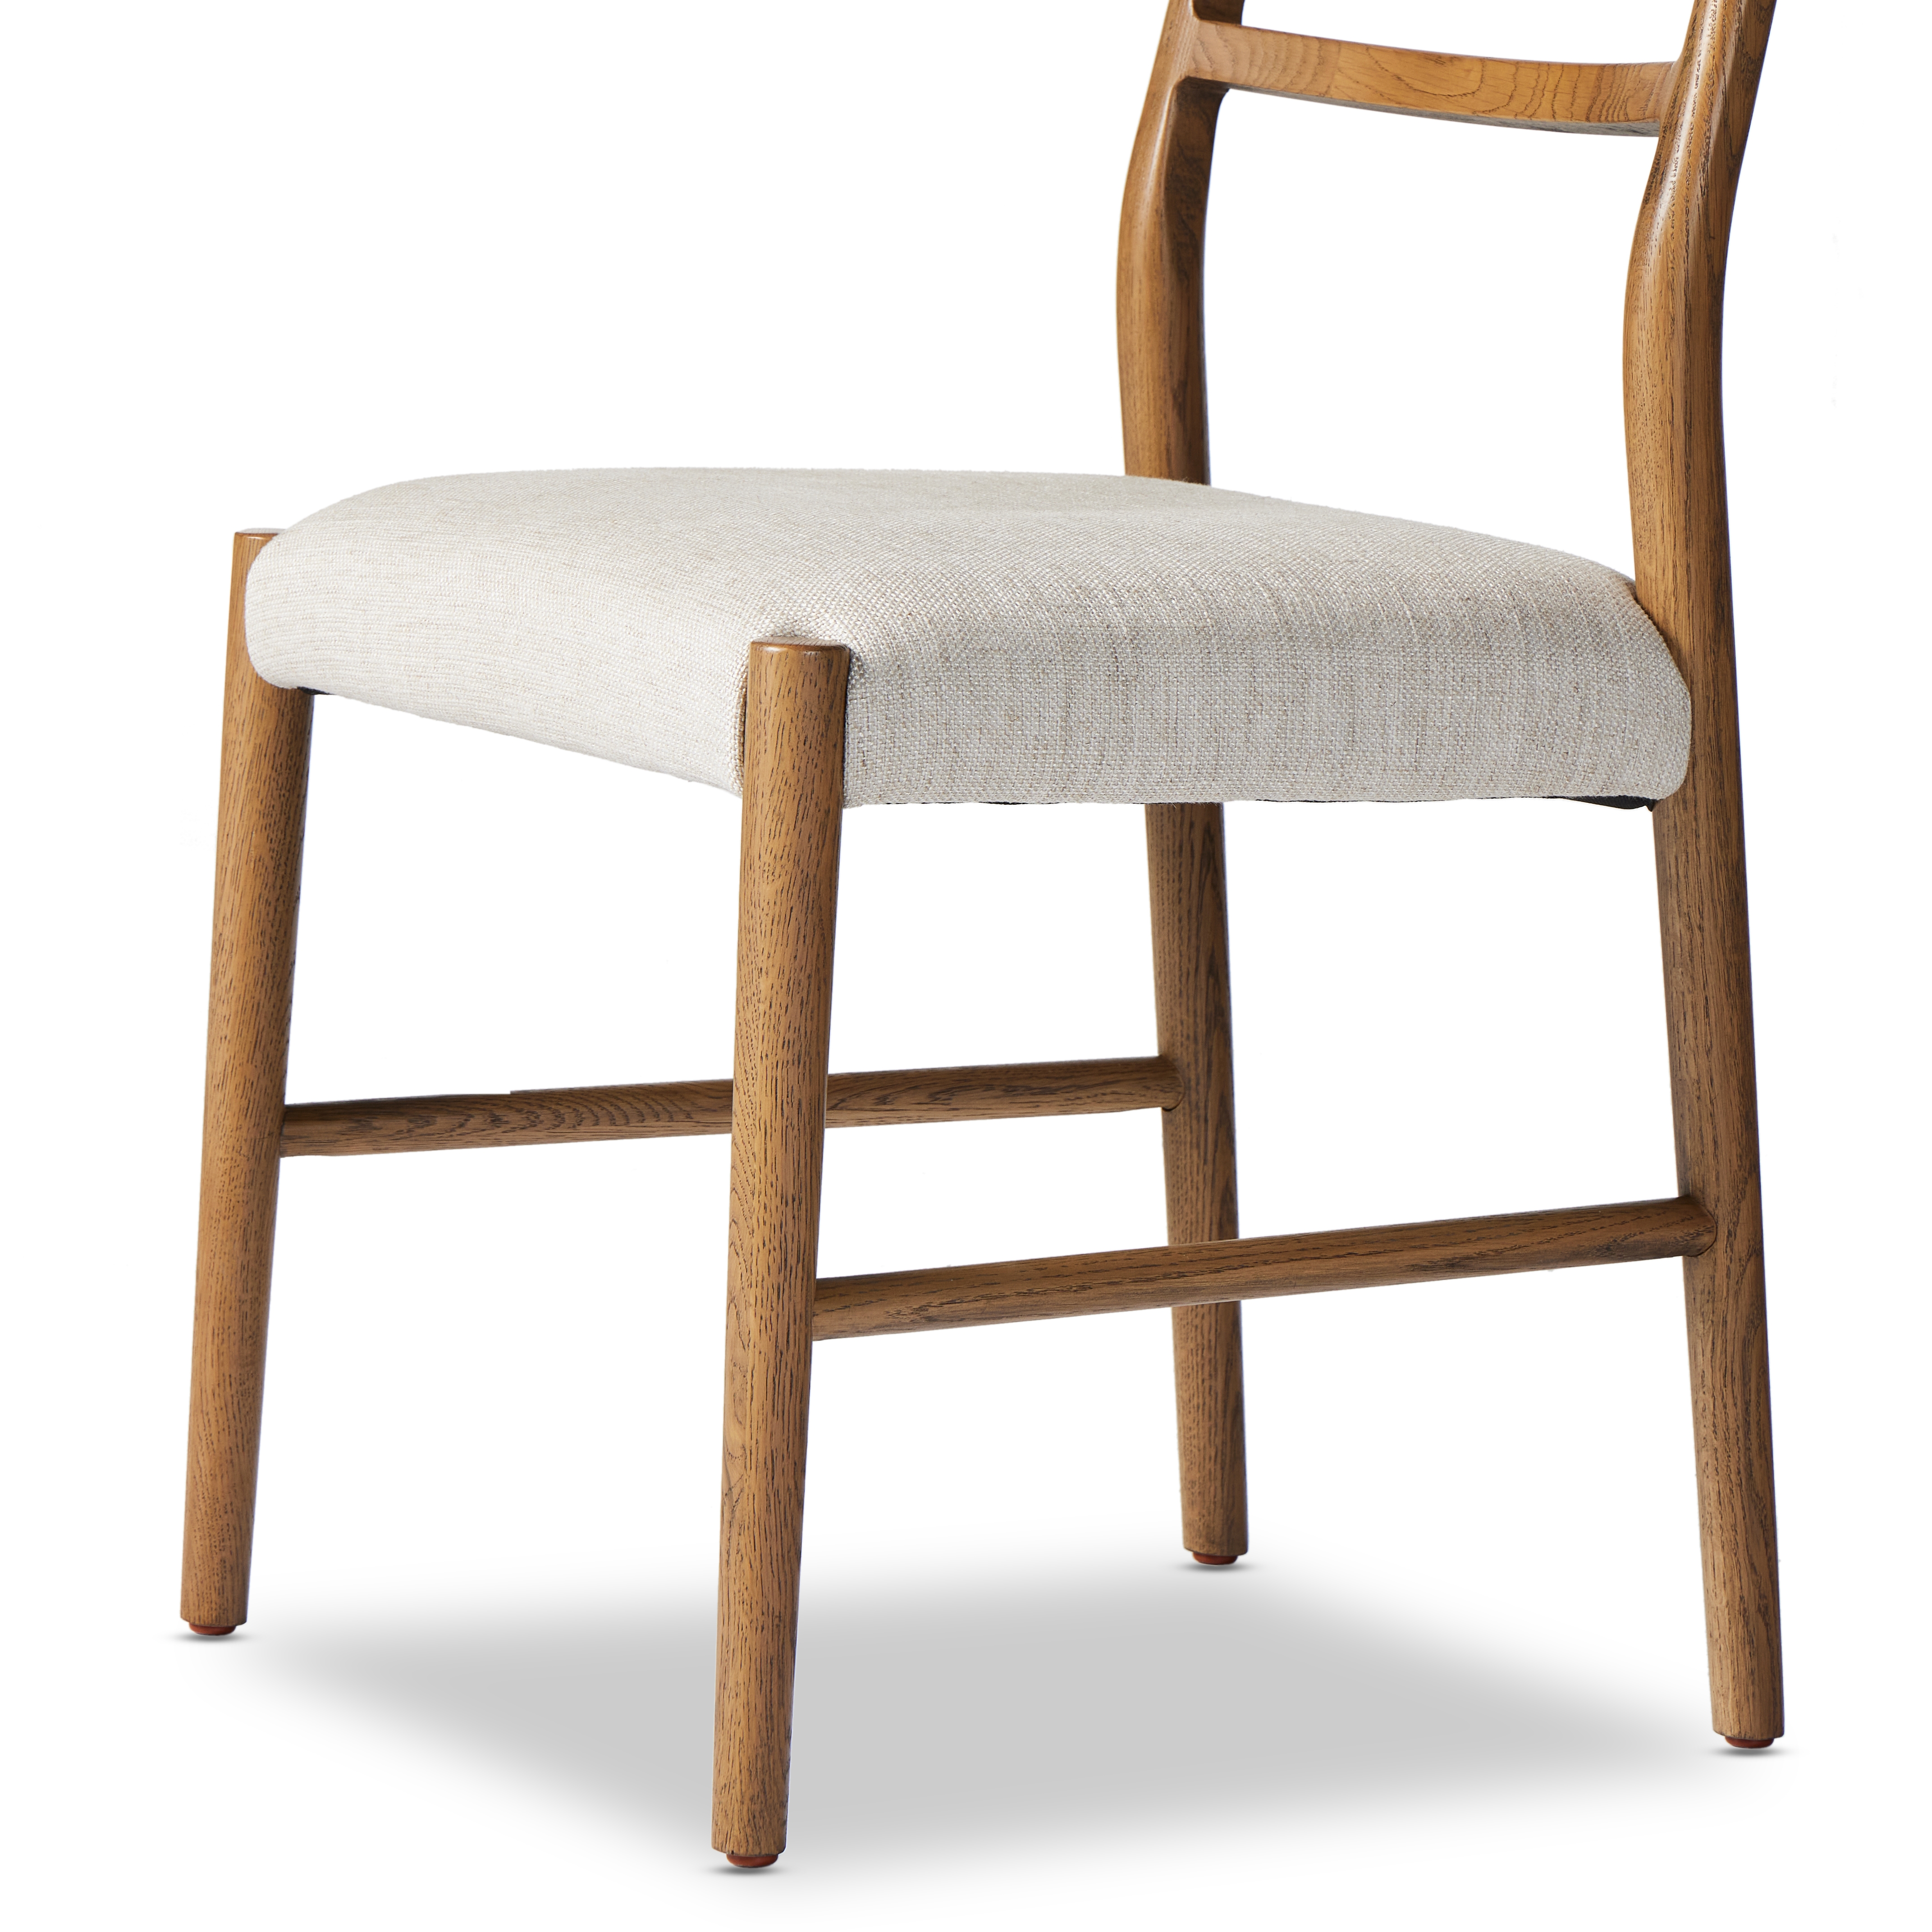 Glenmore Dining Chair-Smoked Oak - Image 7